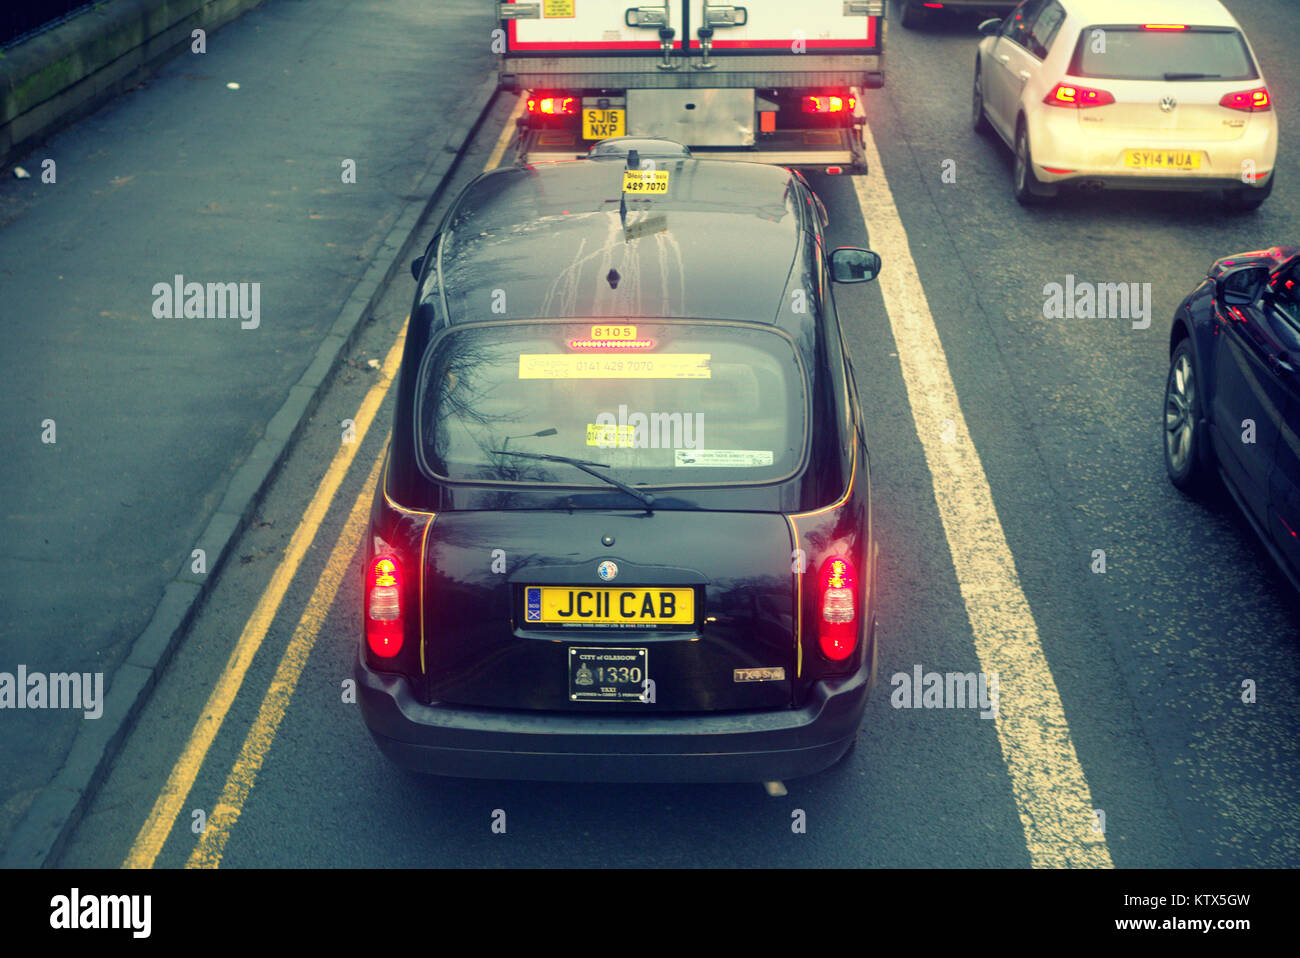 London black taxi cab on the road street between yellow lines with apt licence plate cab stuck in traffic behind  lorry truck in perspective red light Stock Photo